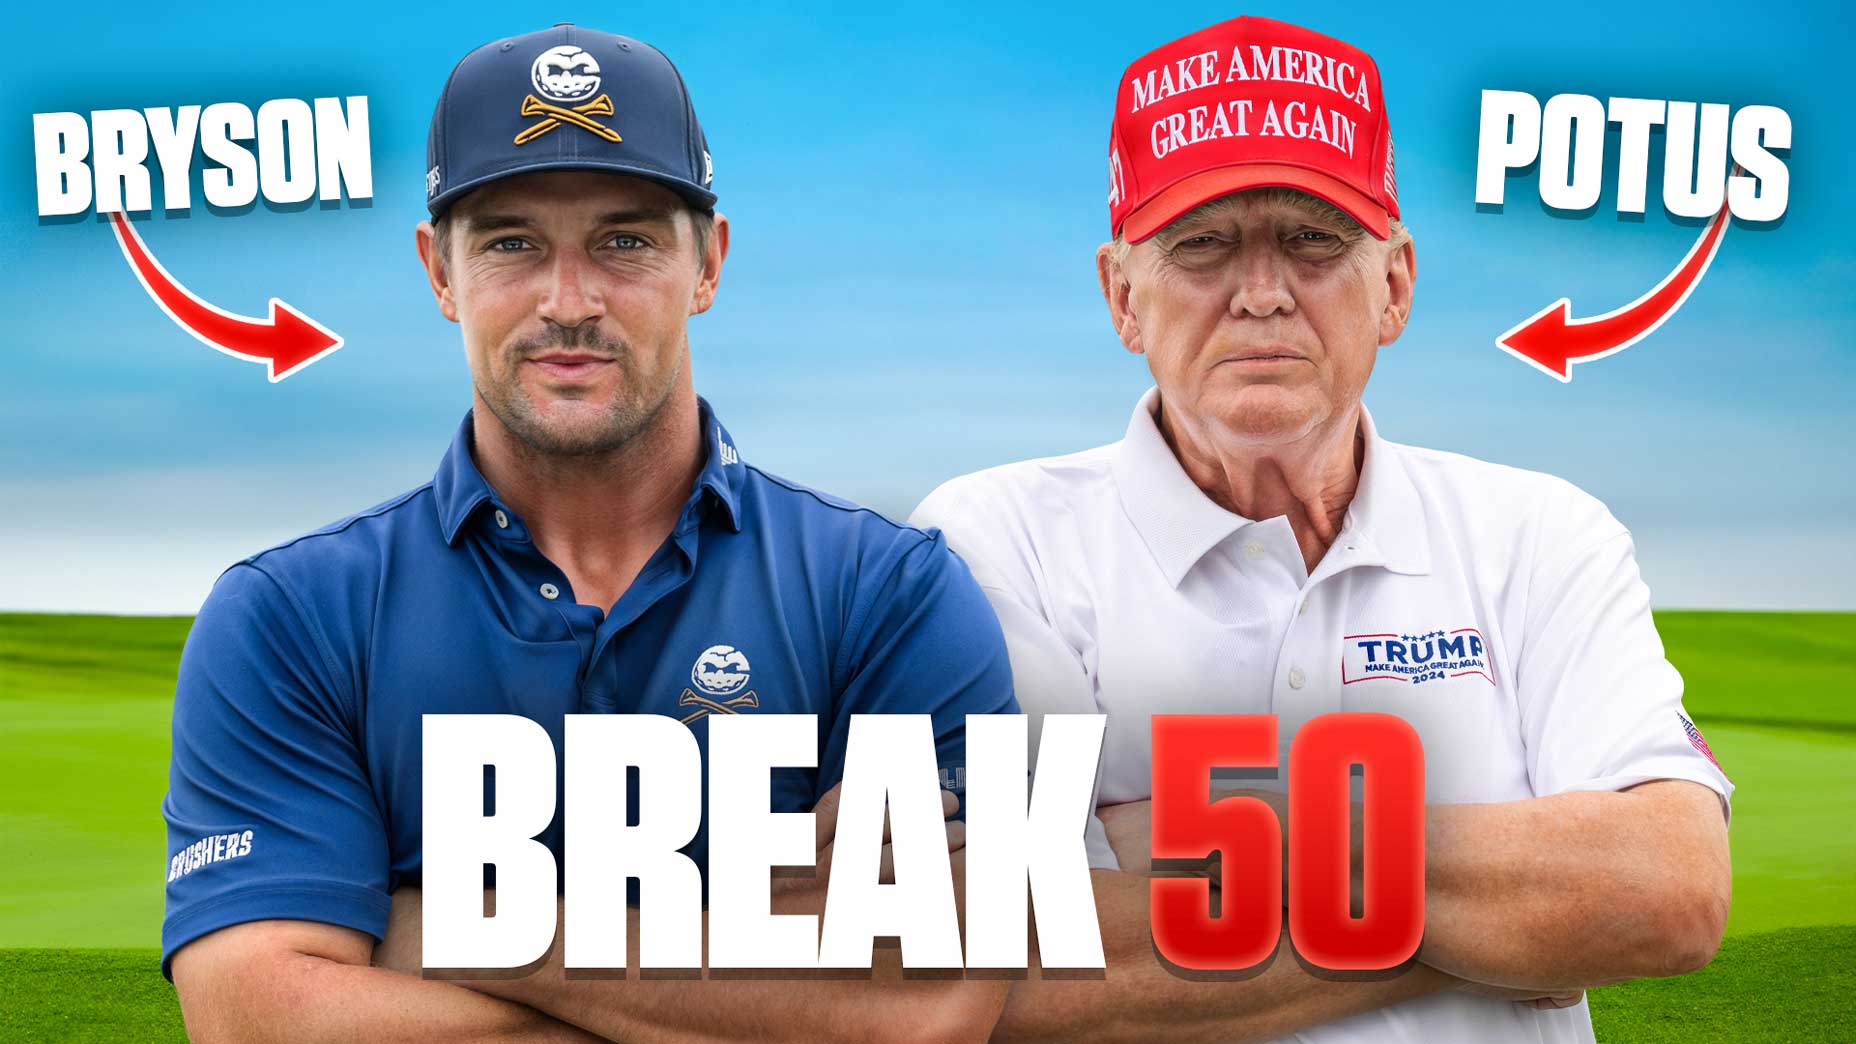 Bryson DeChambeau hosted former president Donald Trump on his YouTube channel.